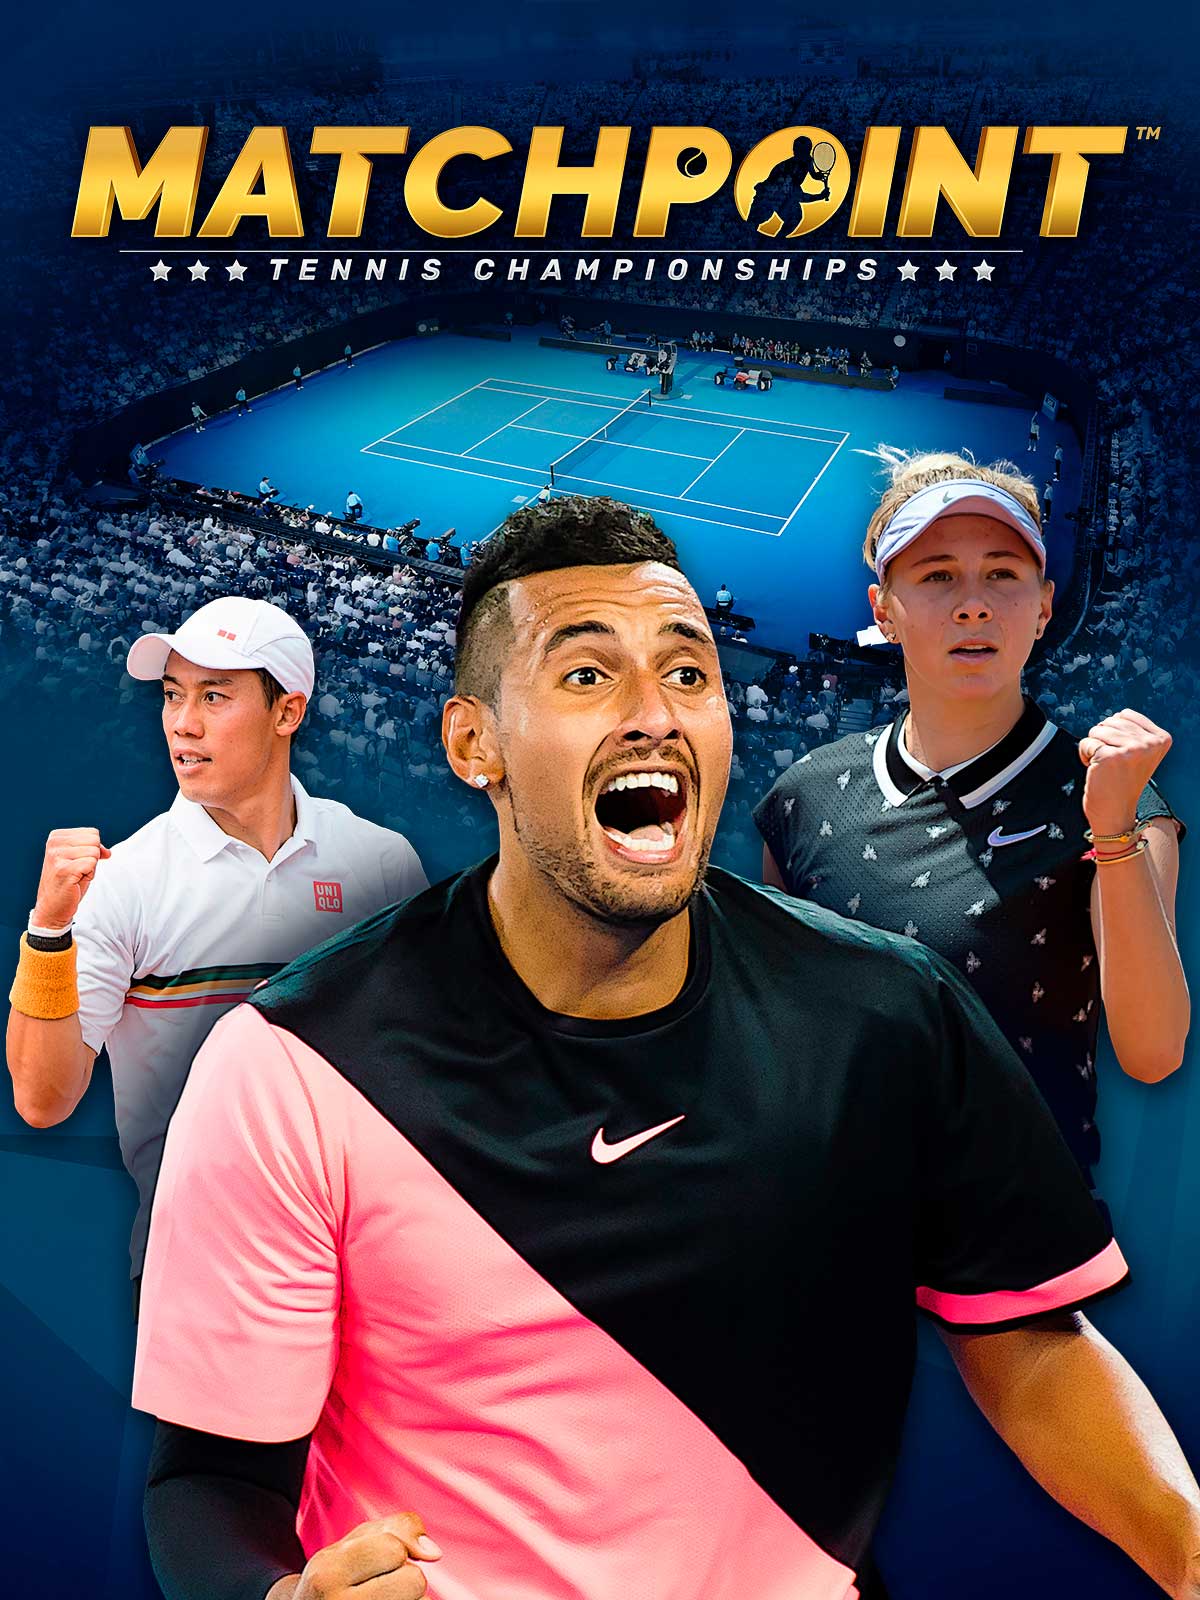 Matchpoint: Tennis Championships [PC, Цифровая версия] (Цифровая версия)